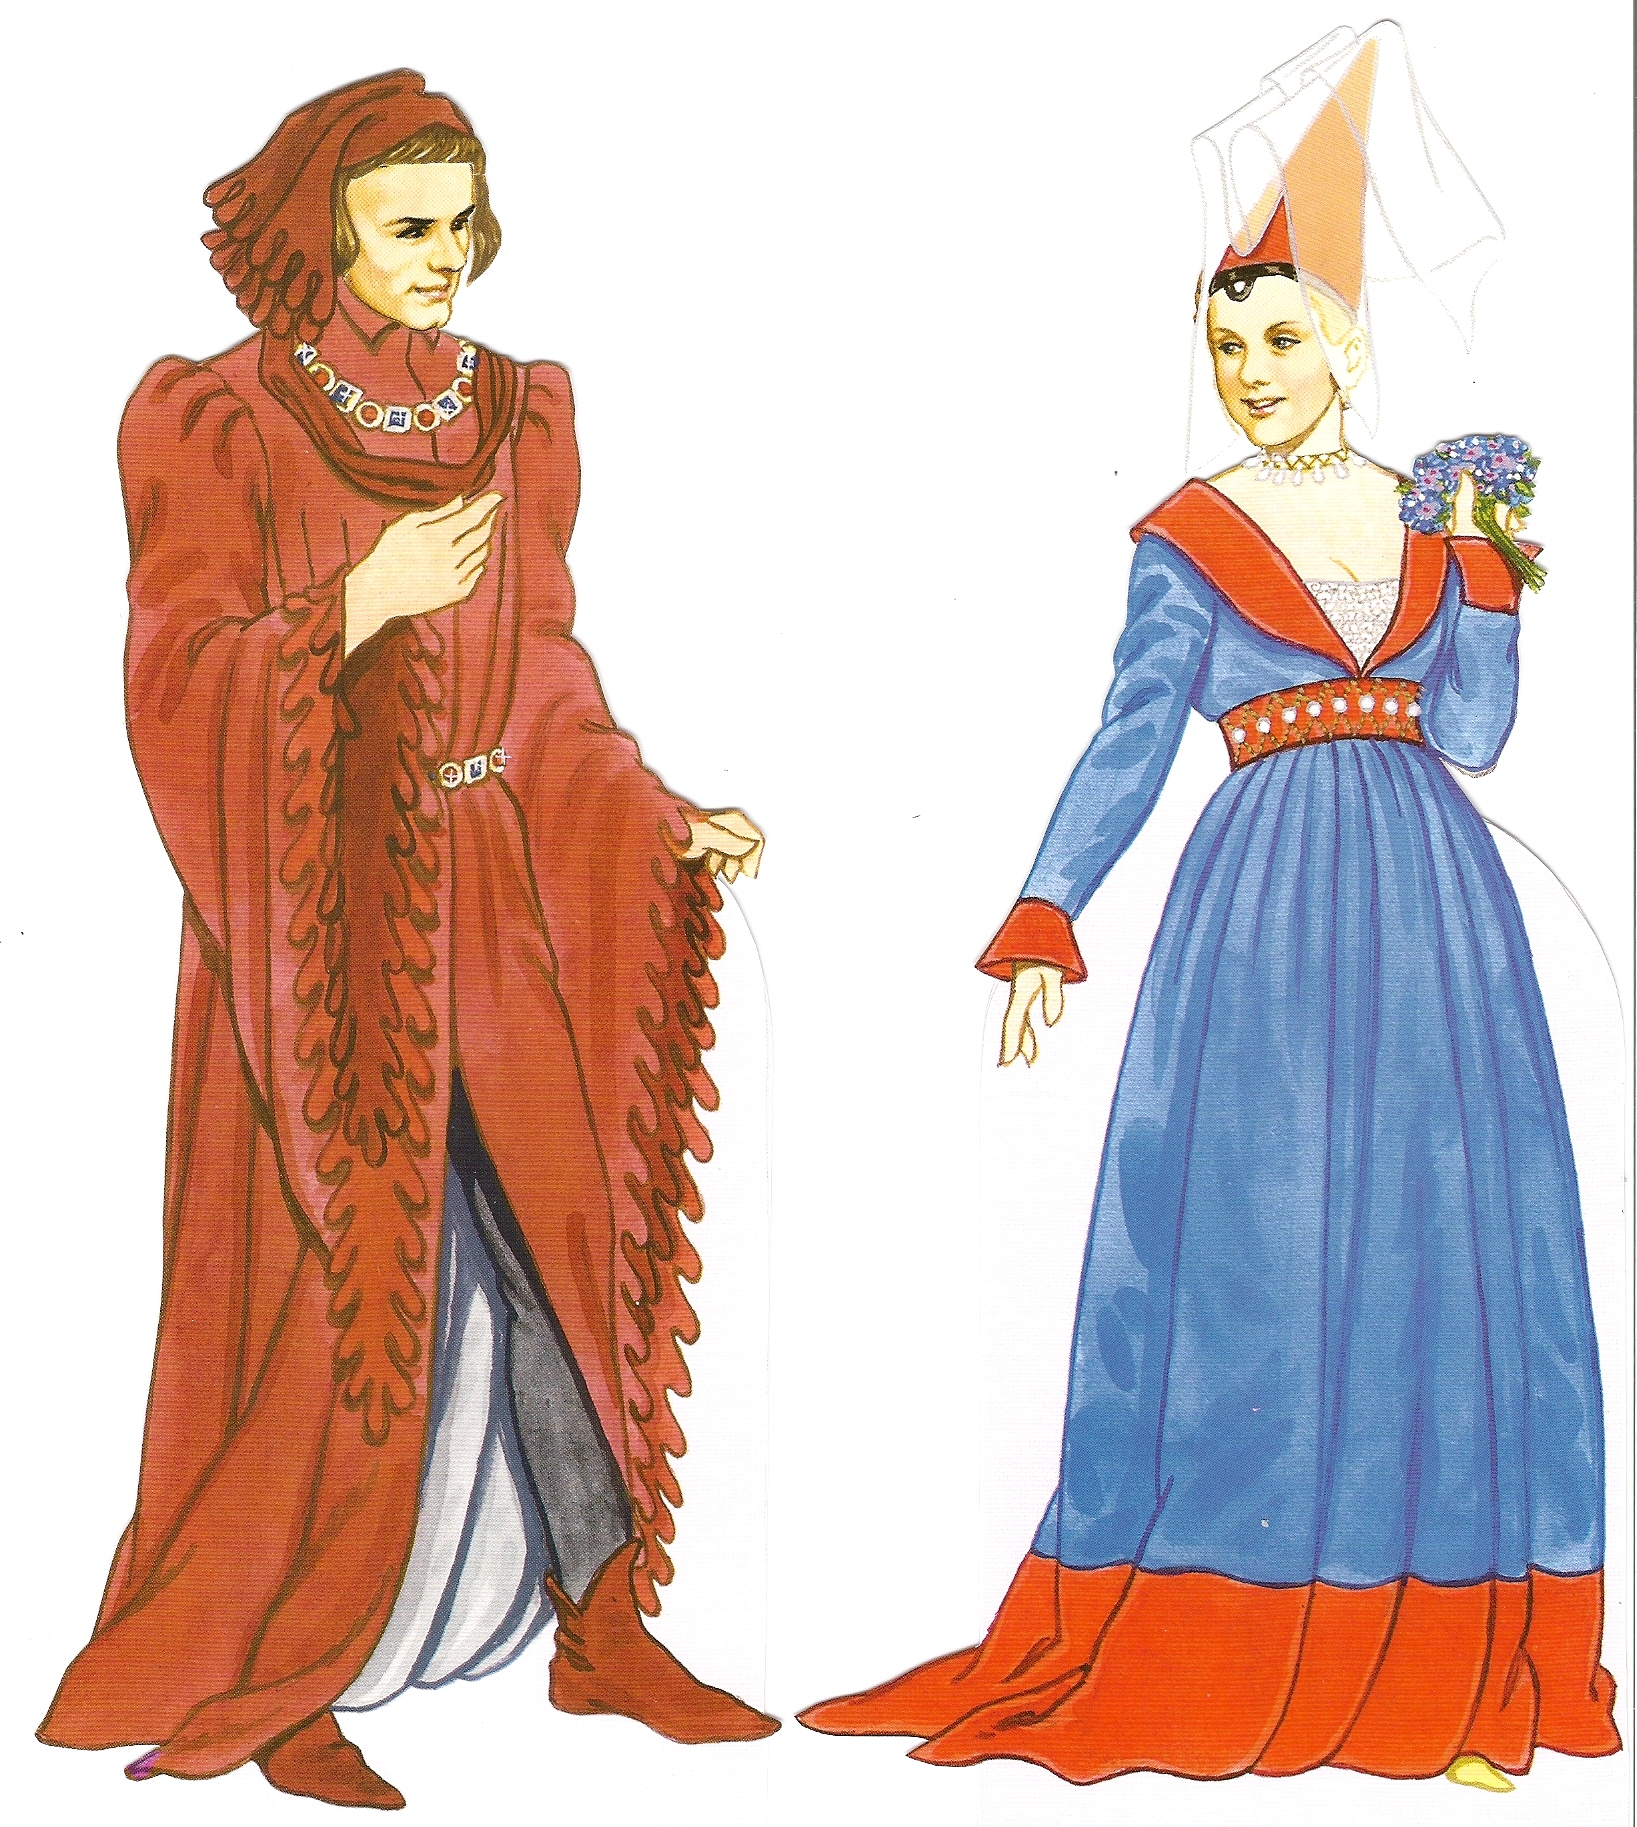 historically accurate medieval queen dress